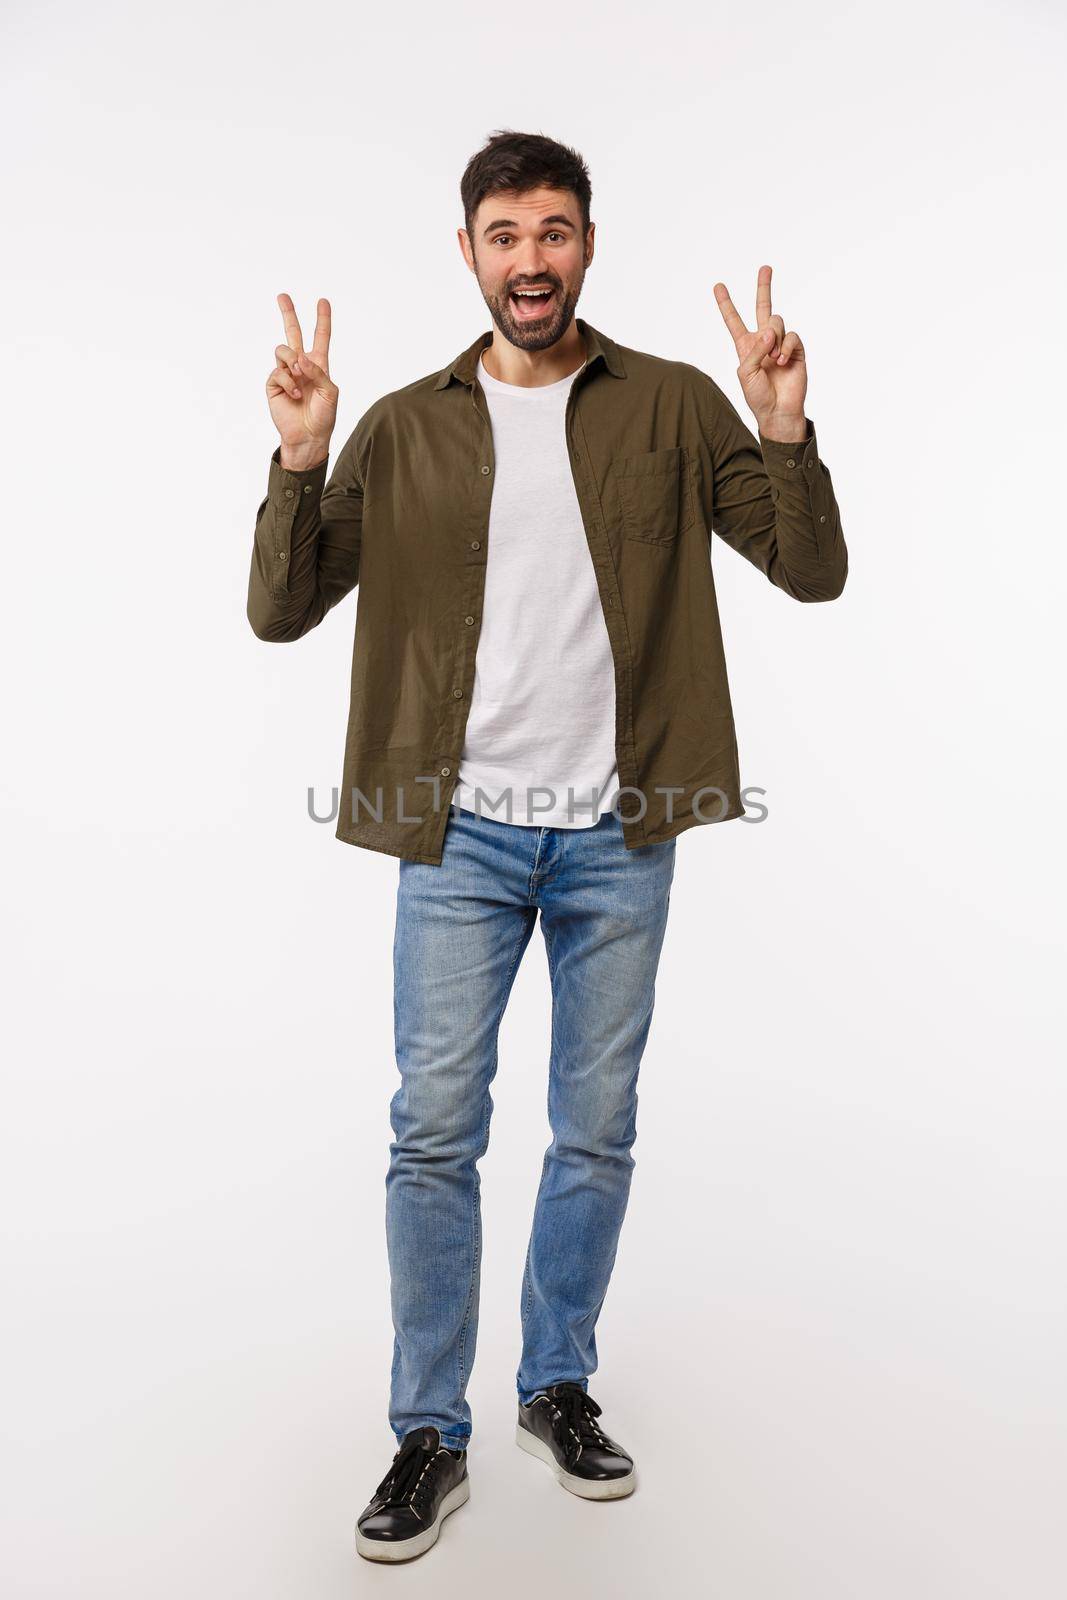 Vertical-shot full-length funny and attractive male model in jeans and coat making quotation gesture and smiling, show peace signs and express positive enthusiastic attitude, white background.